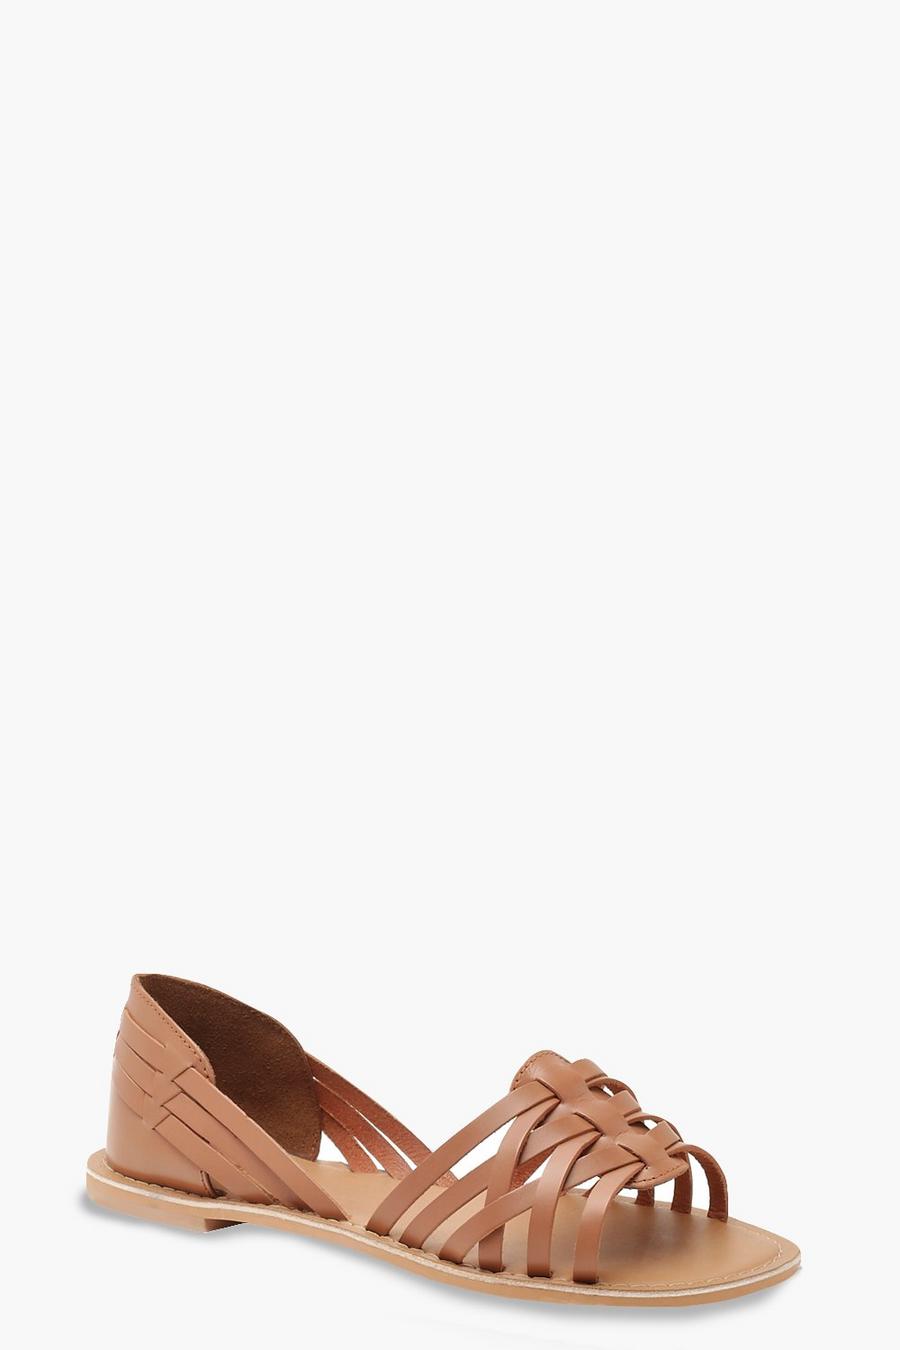 Tan marrón Wide Fit Woven Leather Ballet Flats